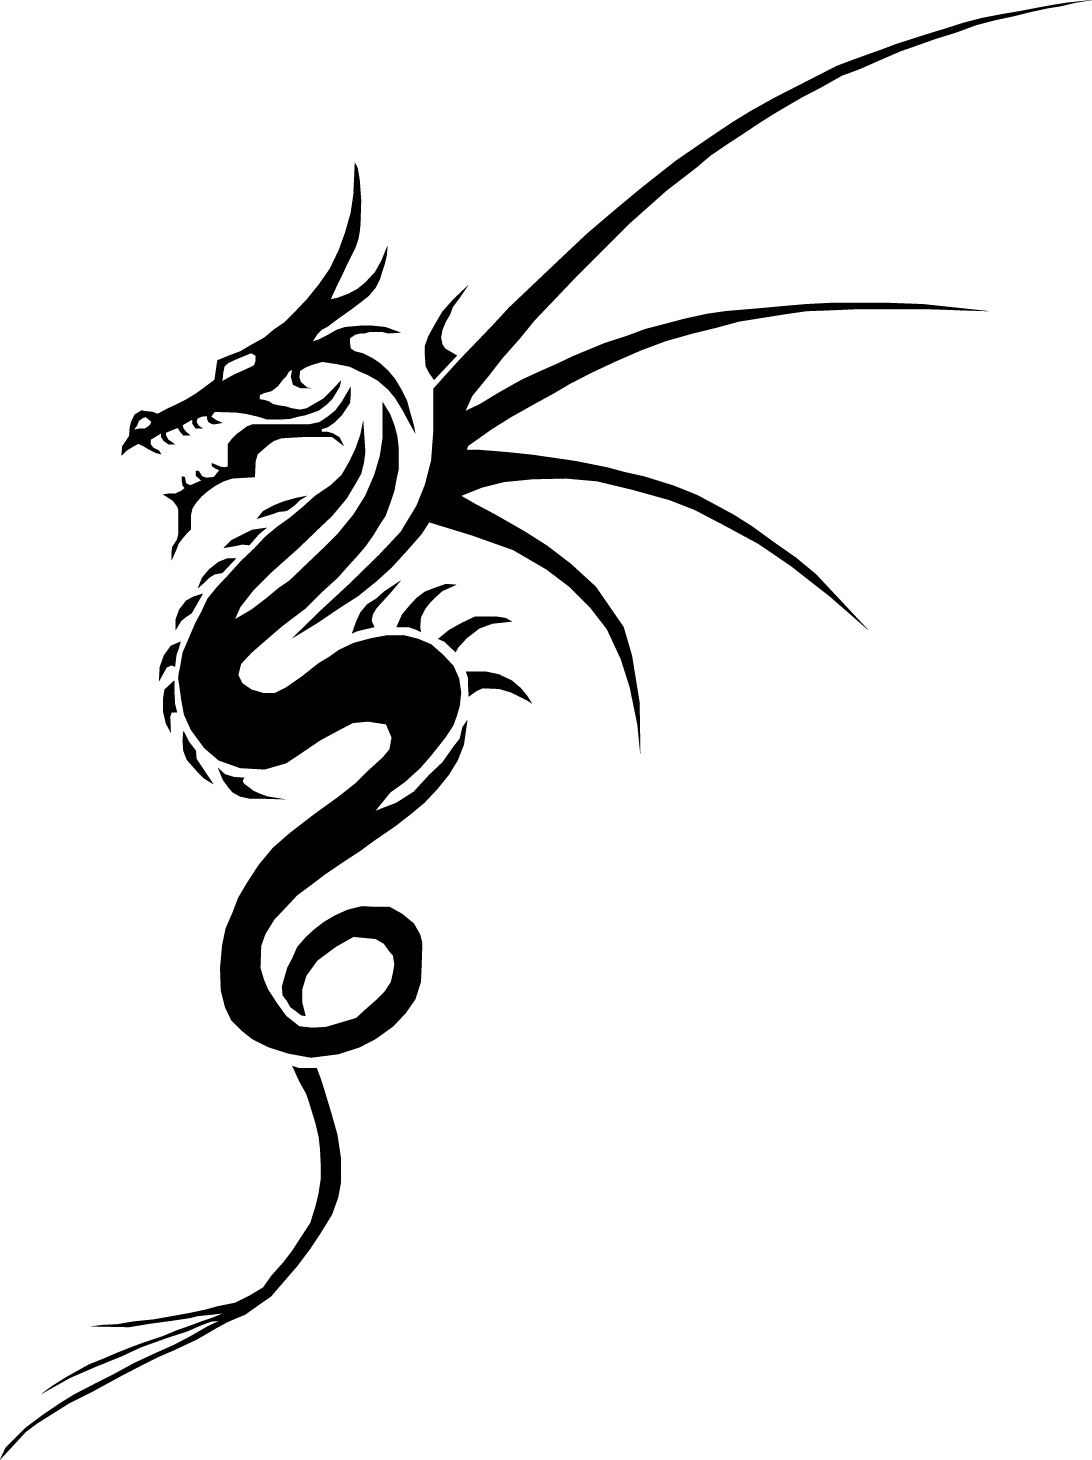 Dragon Tribal Tattoo Pics Free Cliparts That You Can Download To You    